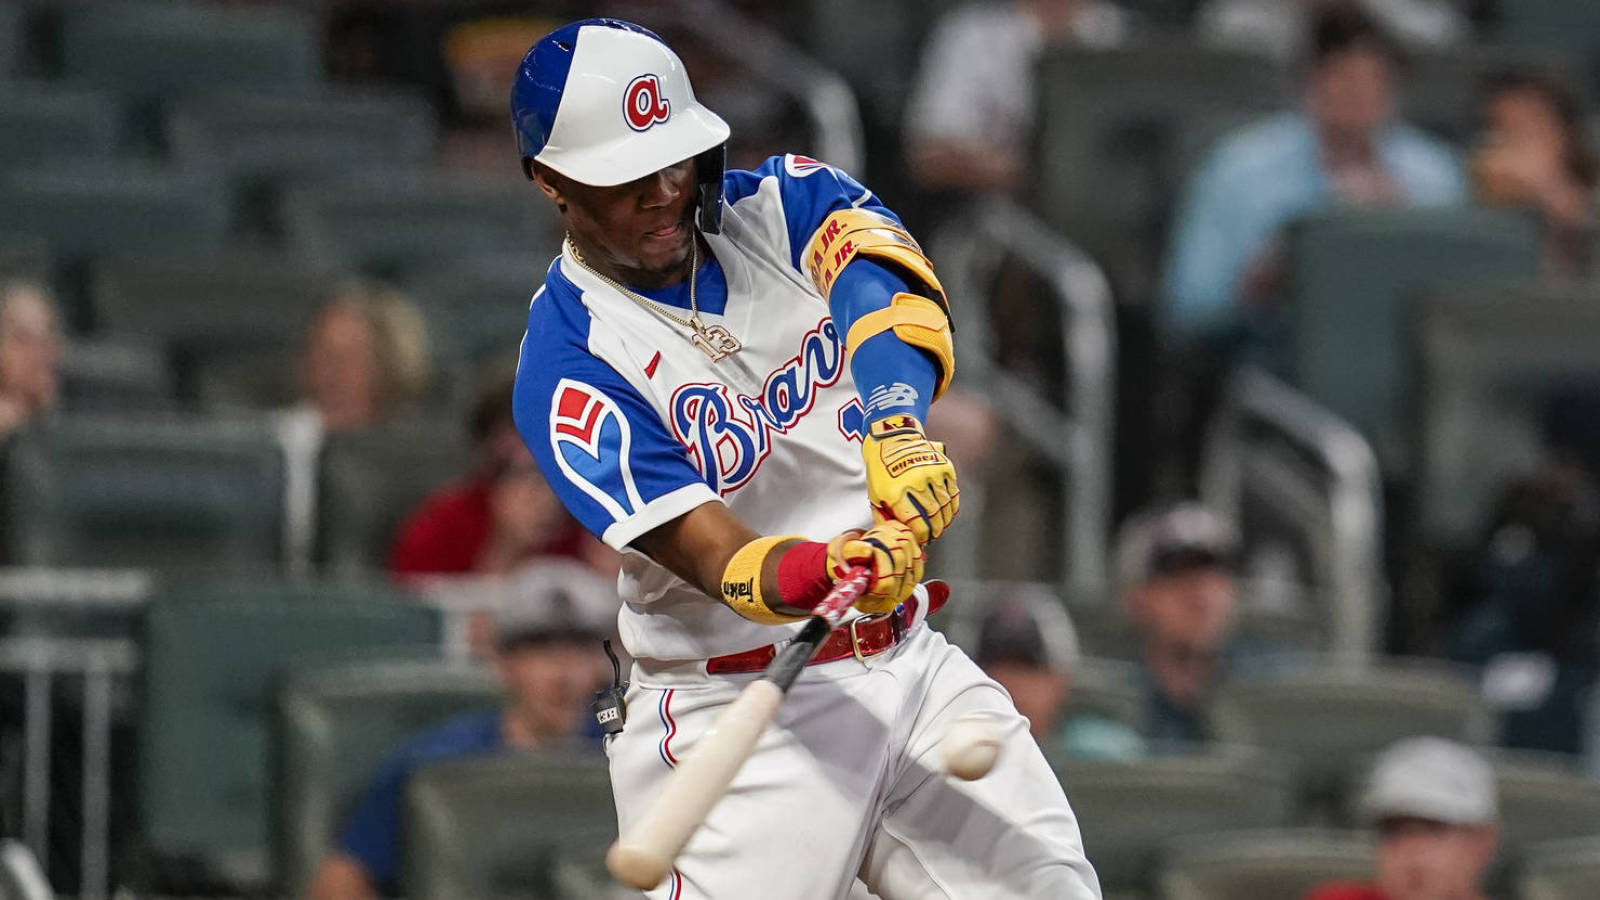 Ronald Acuna Jr. day-to-day with mild abdominal strain